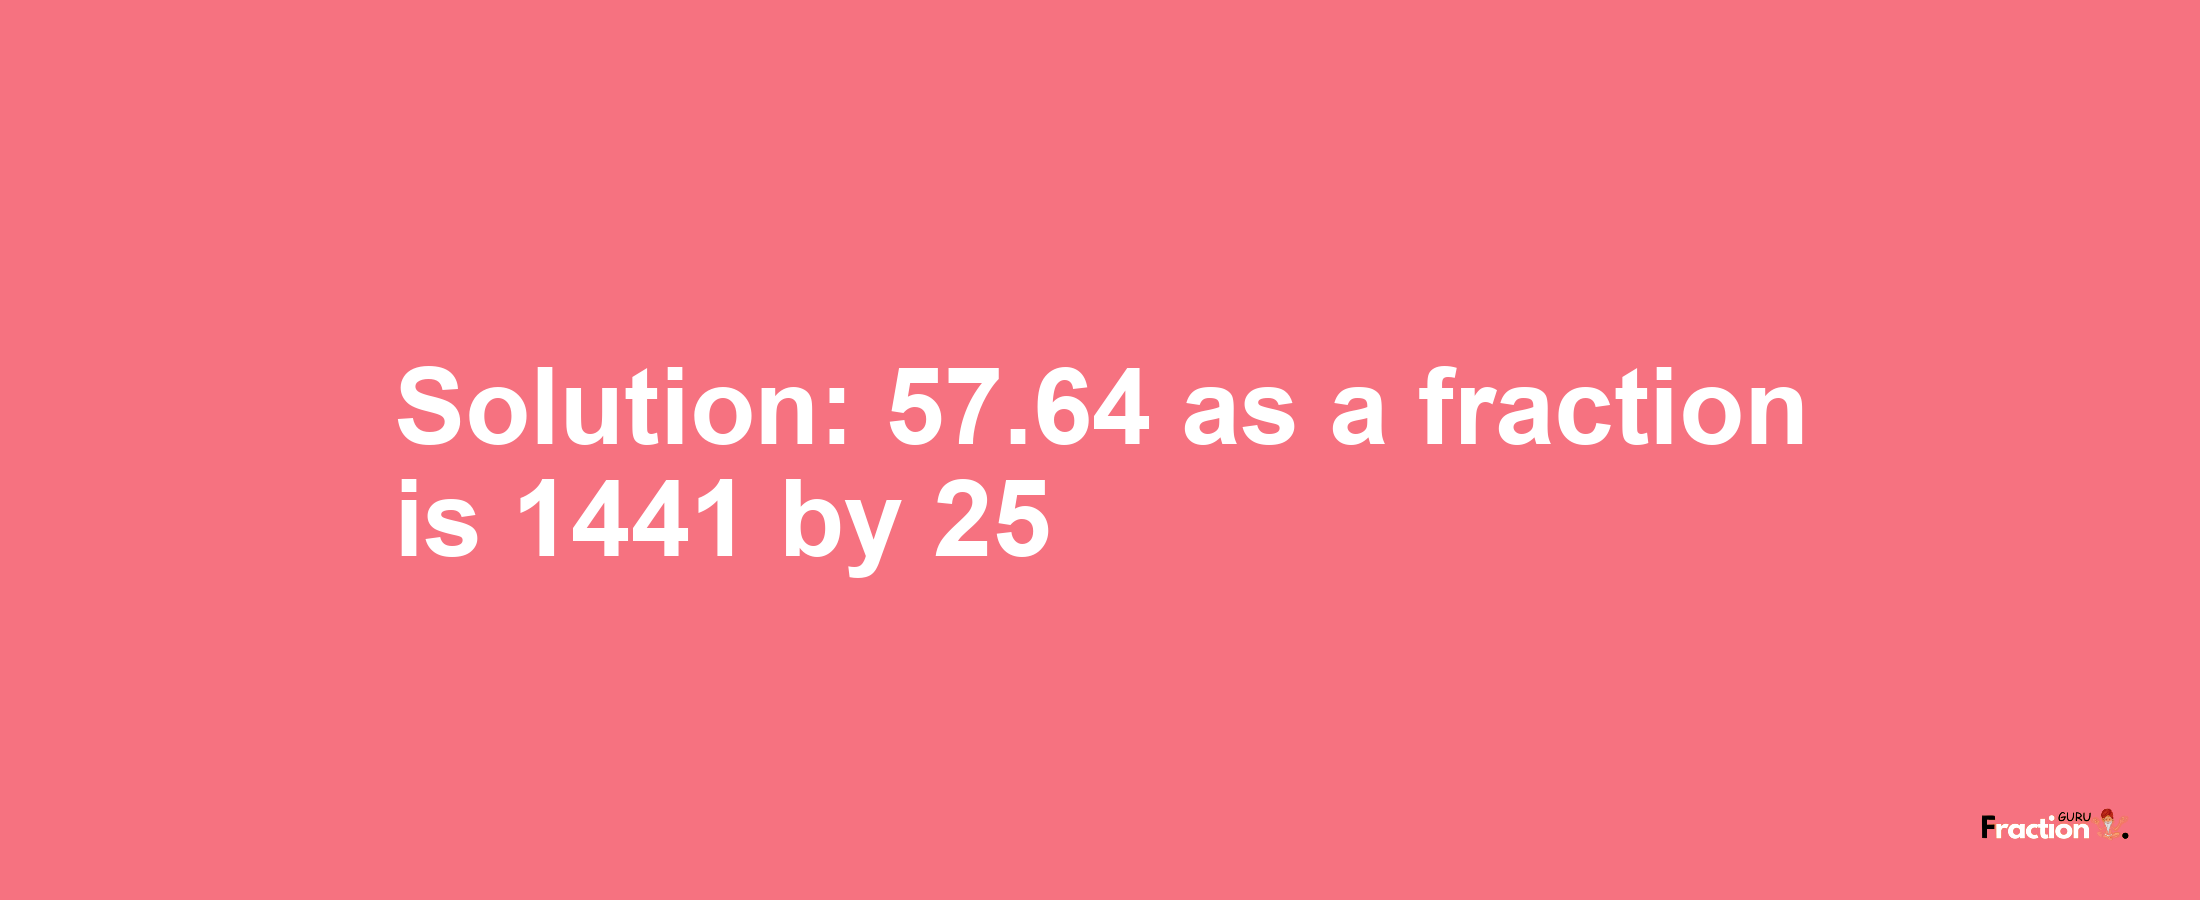 Solution:57.64 as a fraction is 1441/25